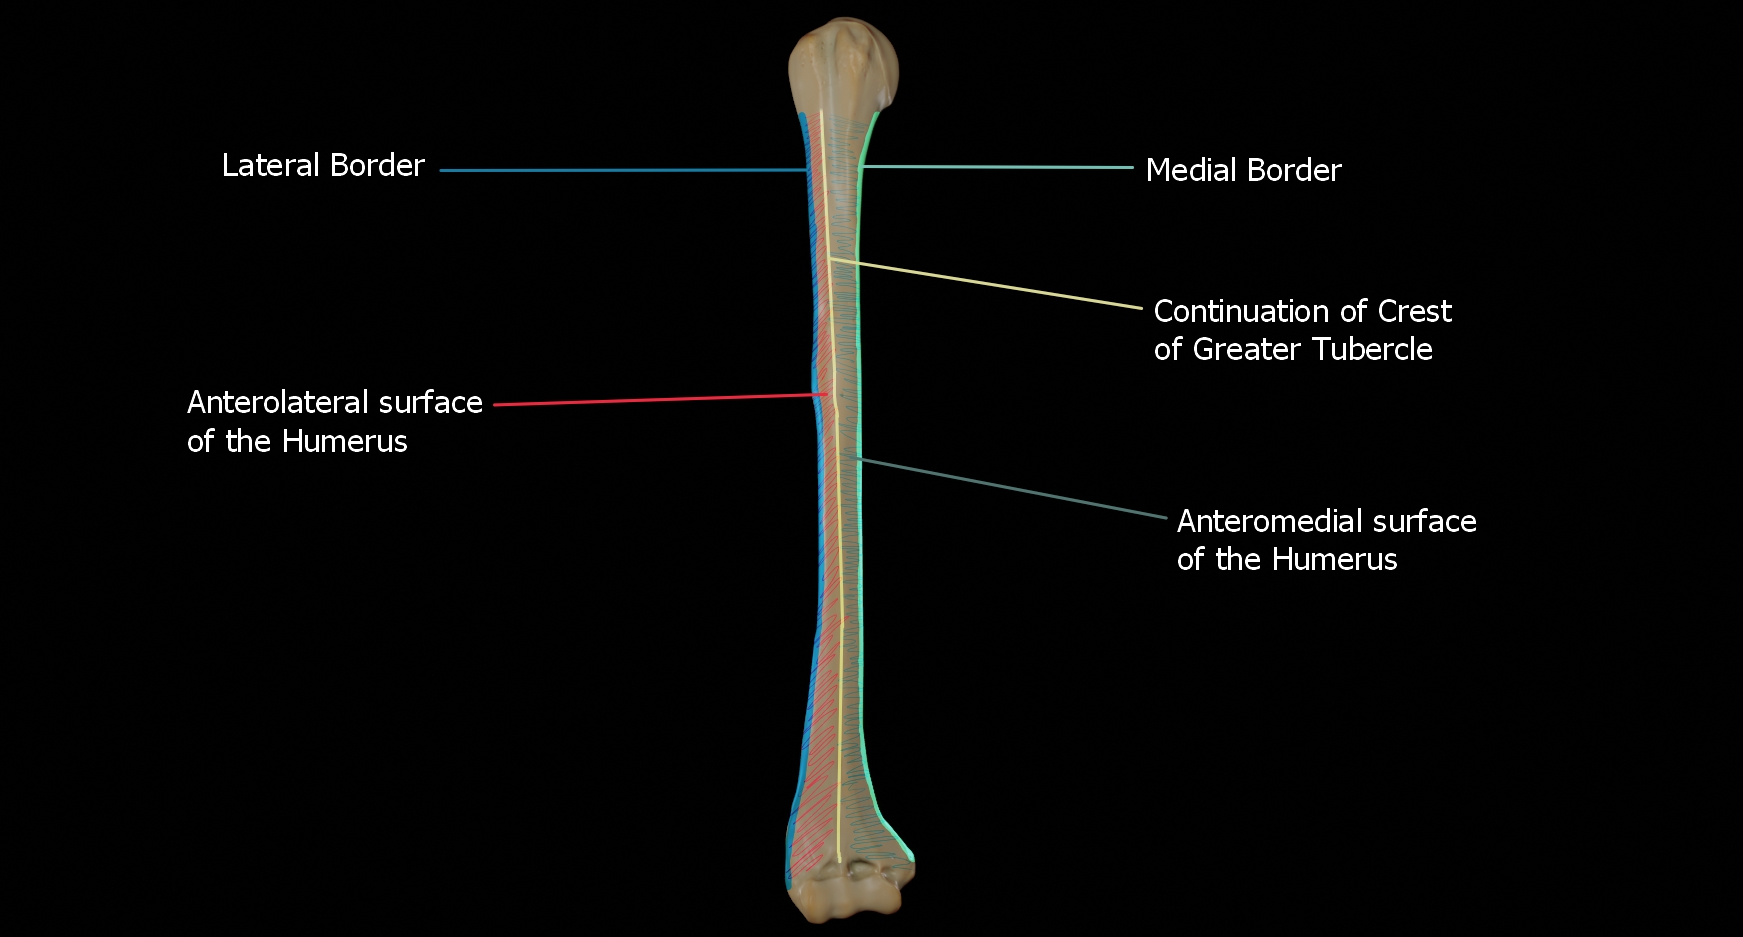 Illustration showing the borders and surfaces on the anterior view of the humerus